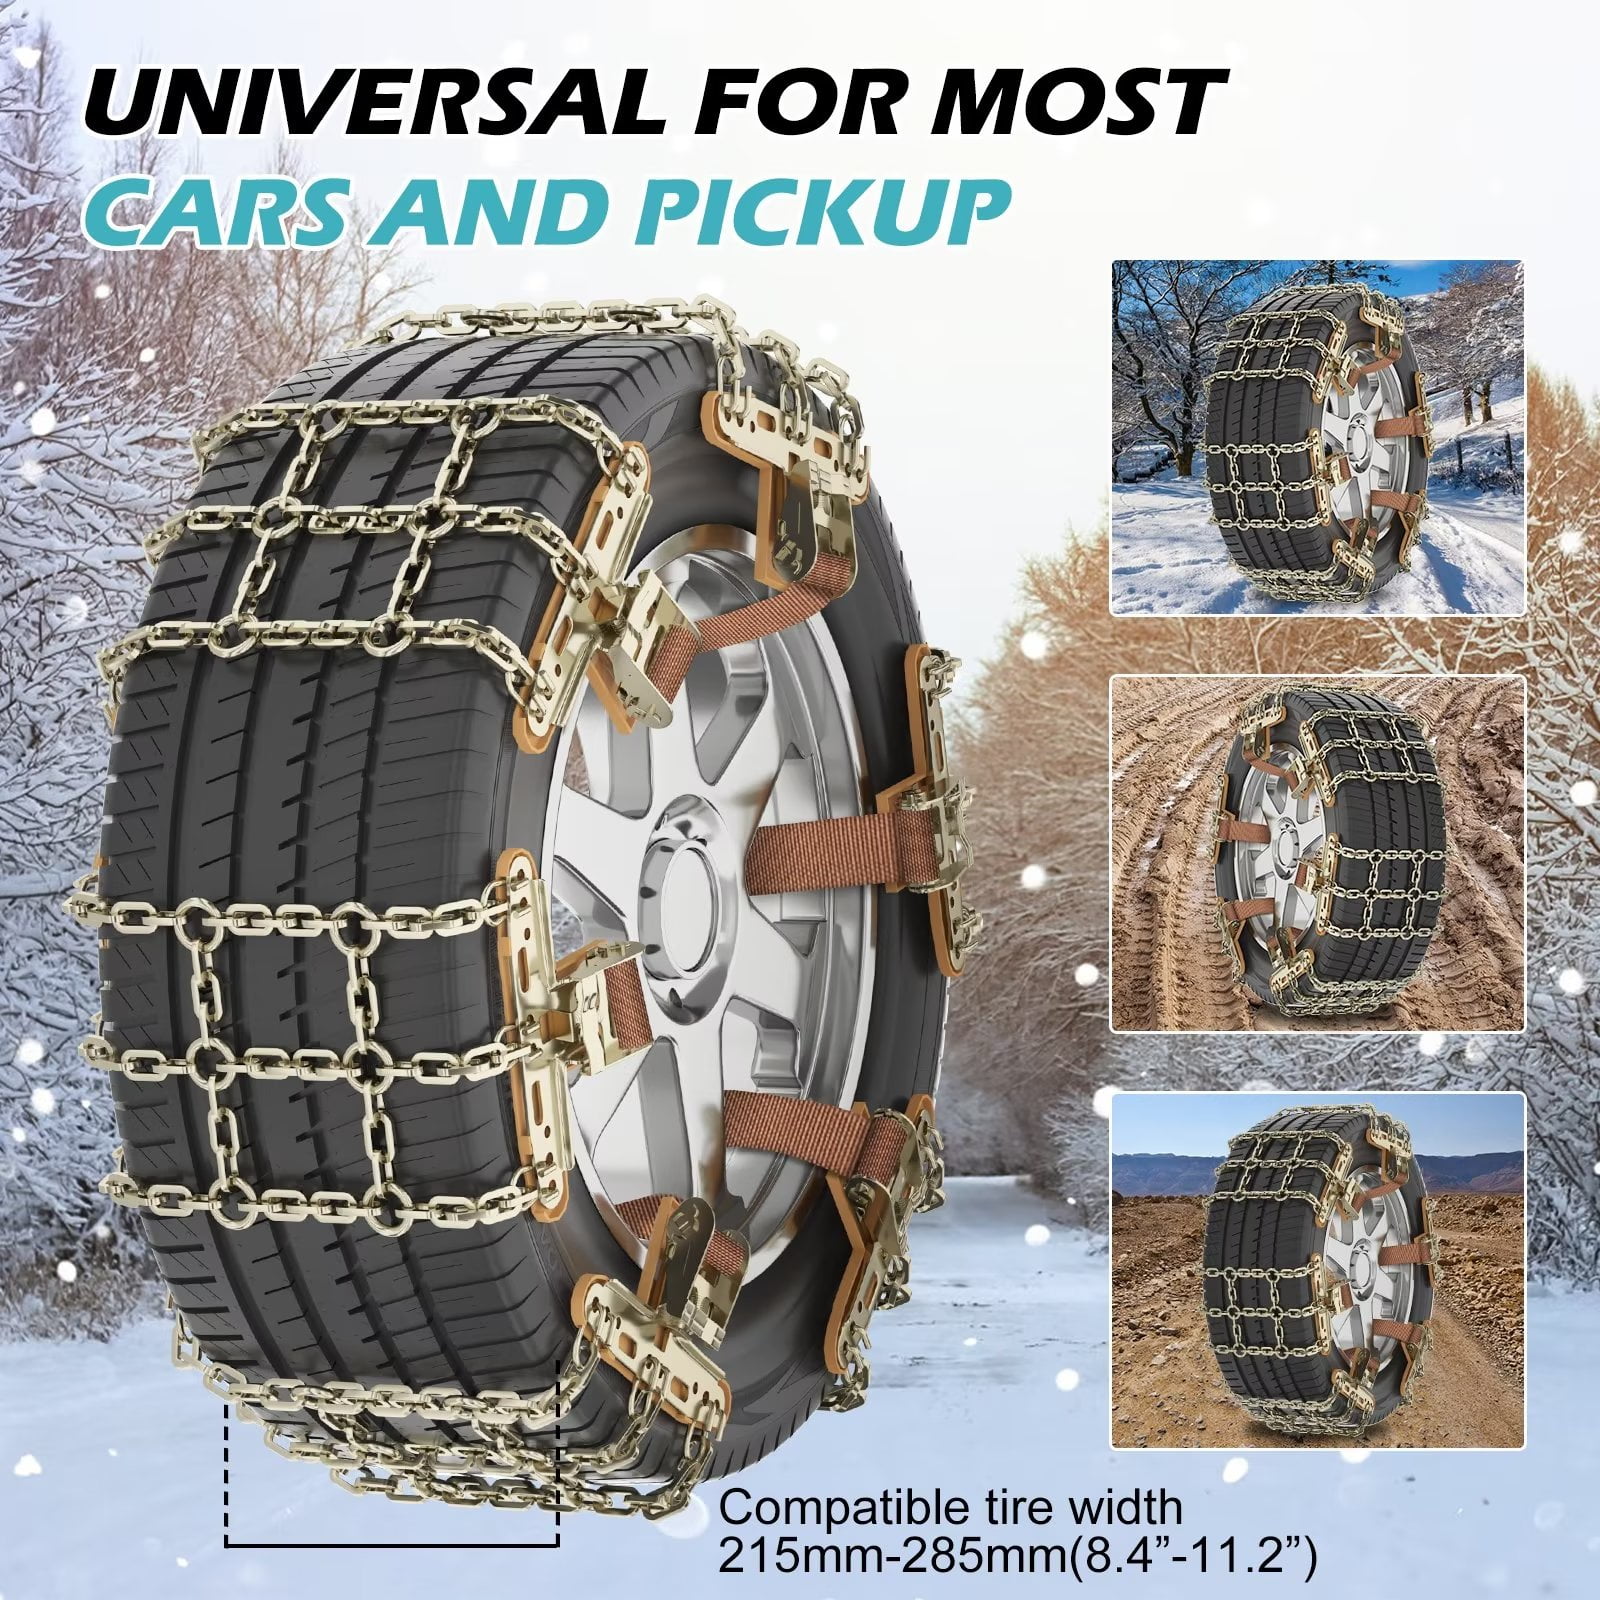 Upgraded Tire Chains, Car Snow Chains Emergency Anti-Skid Chains for Car,  Truck of Tire Width 215mm-285mm, X (6-Pack) Q1600077-X@1 - The Home Depot